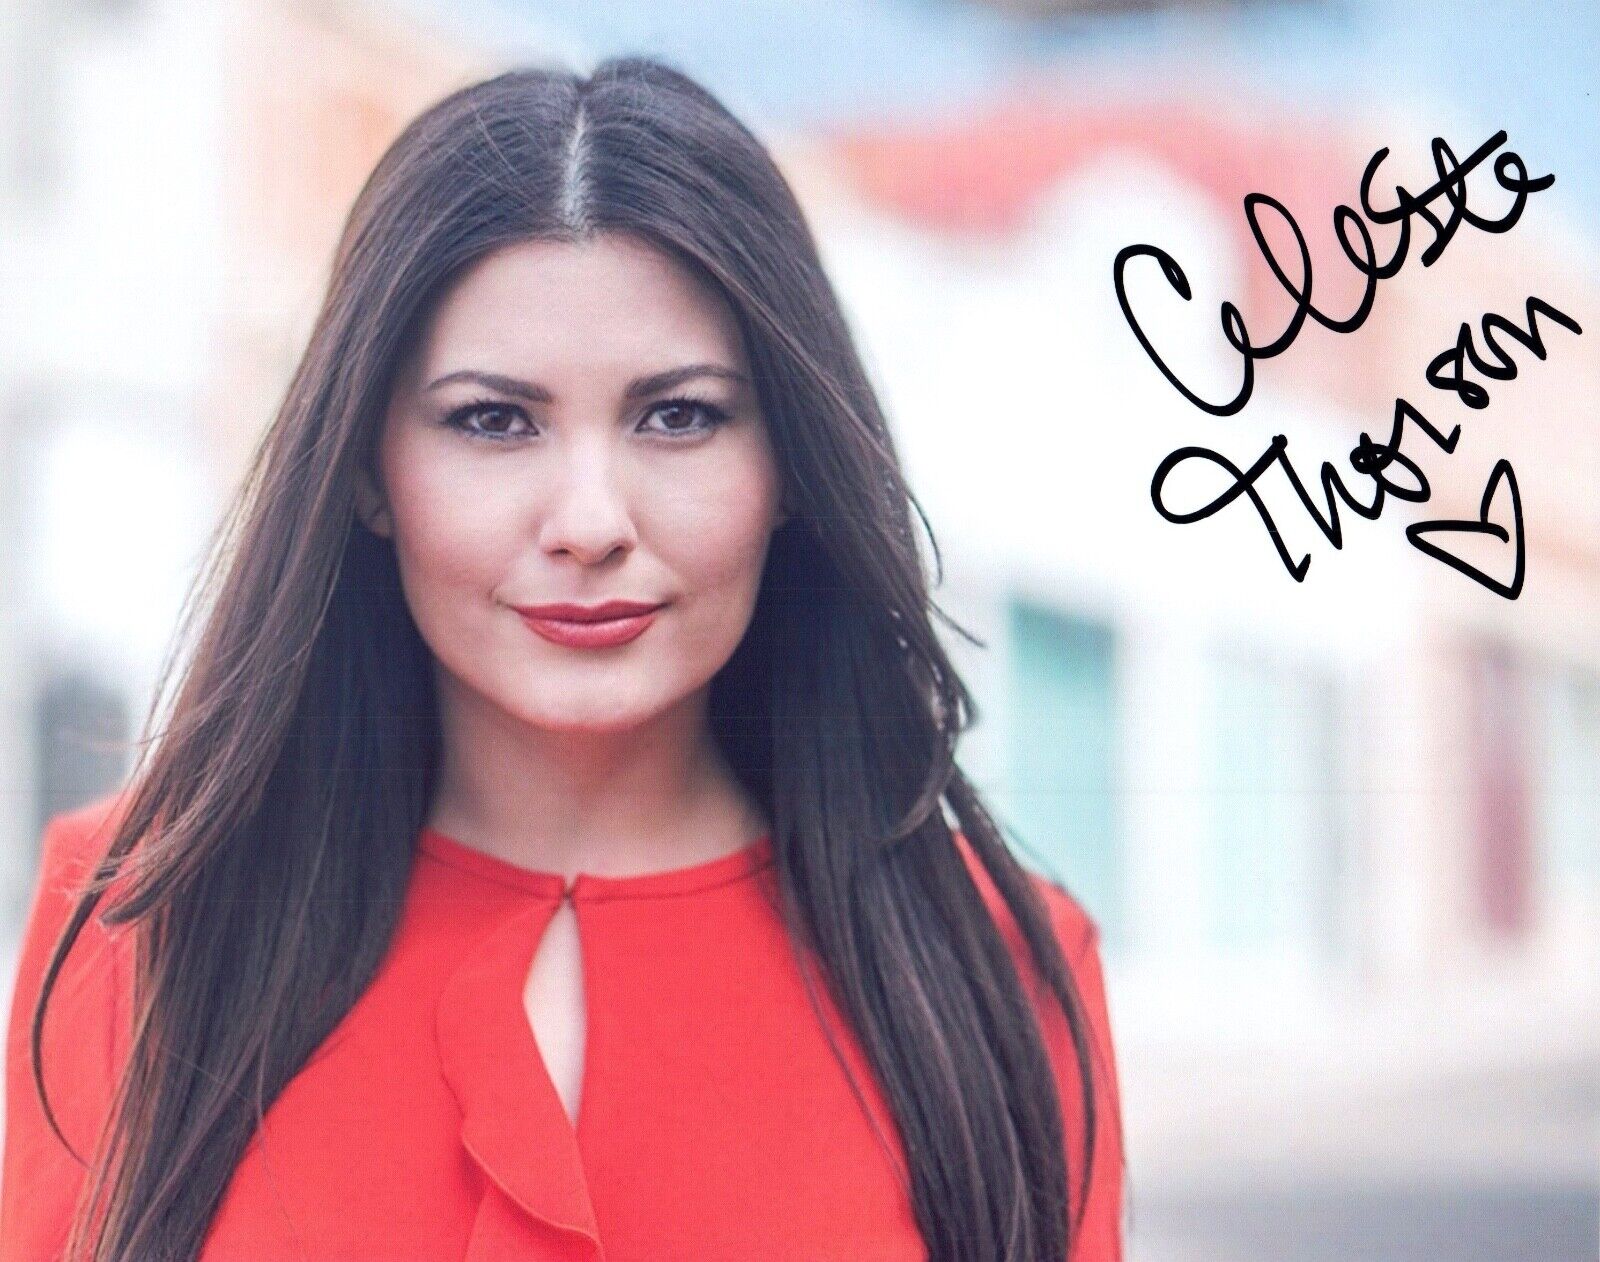 Celeste Thorson Signed Autographed 8x10 Photo Poster painting How I Met Your Mother Actress COA